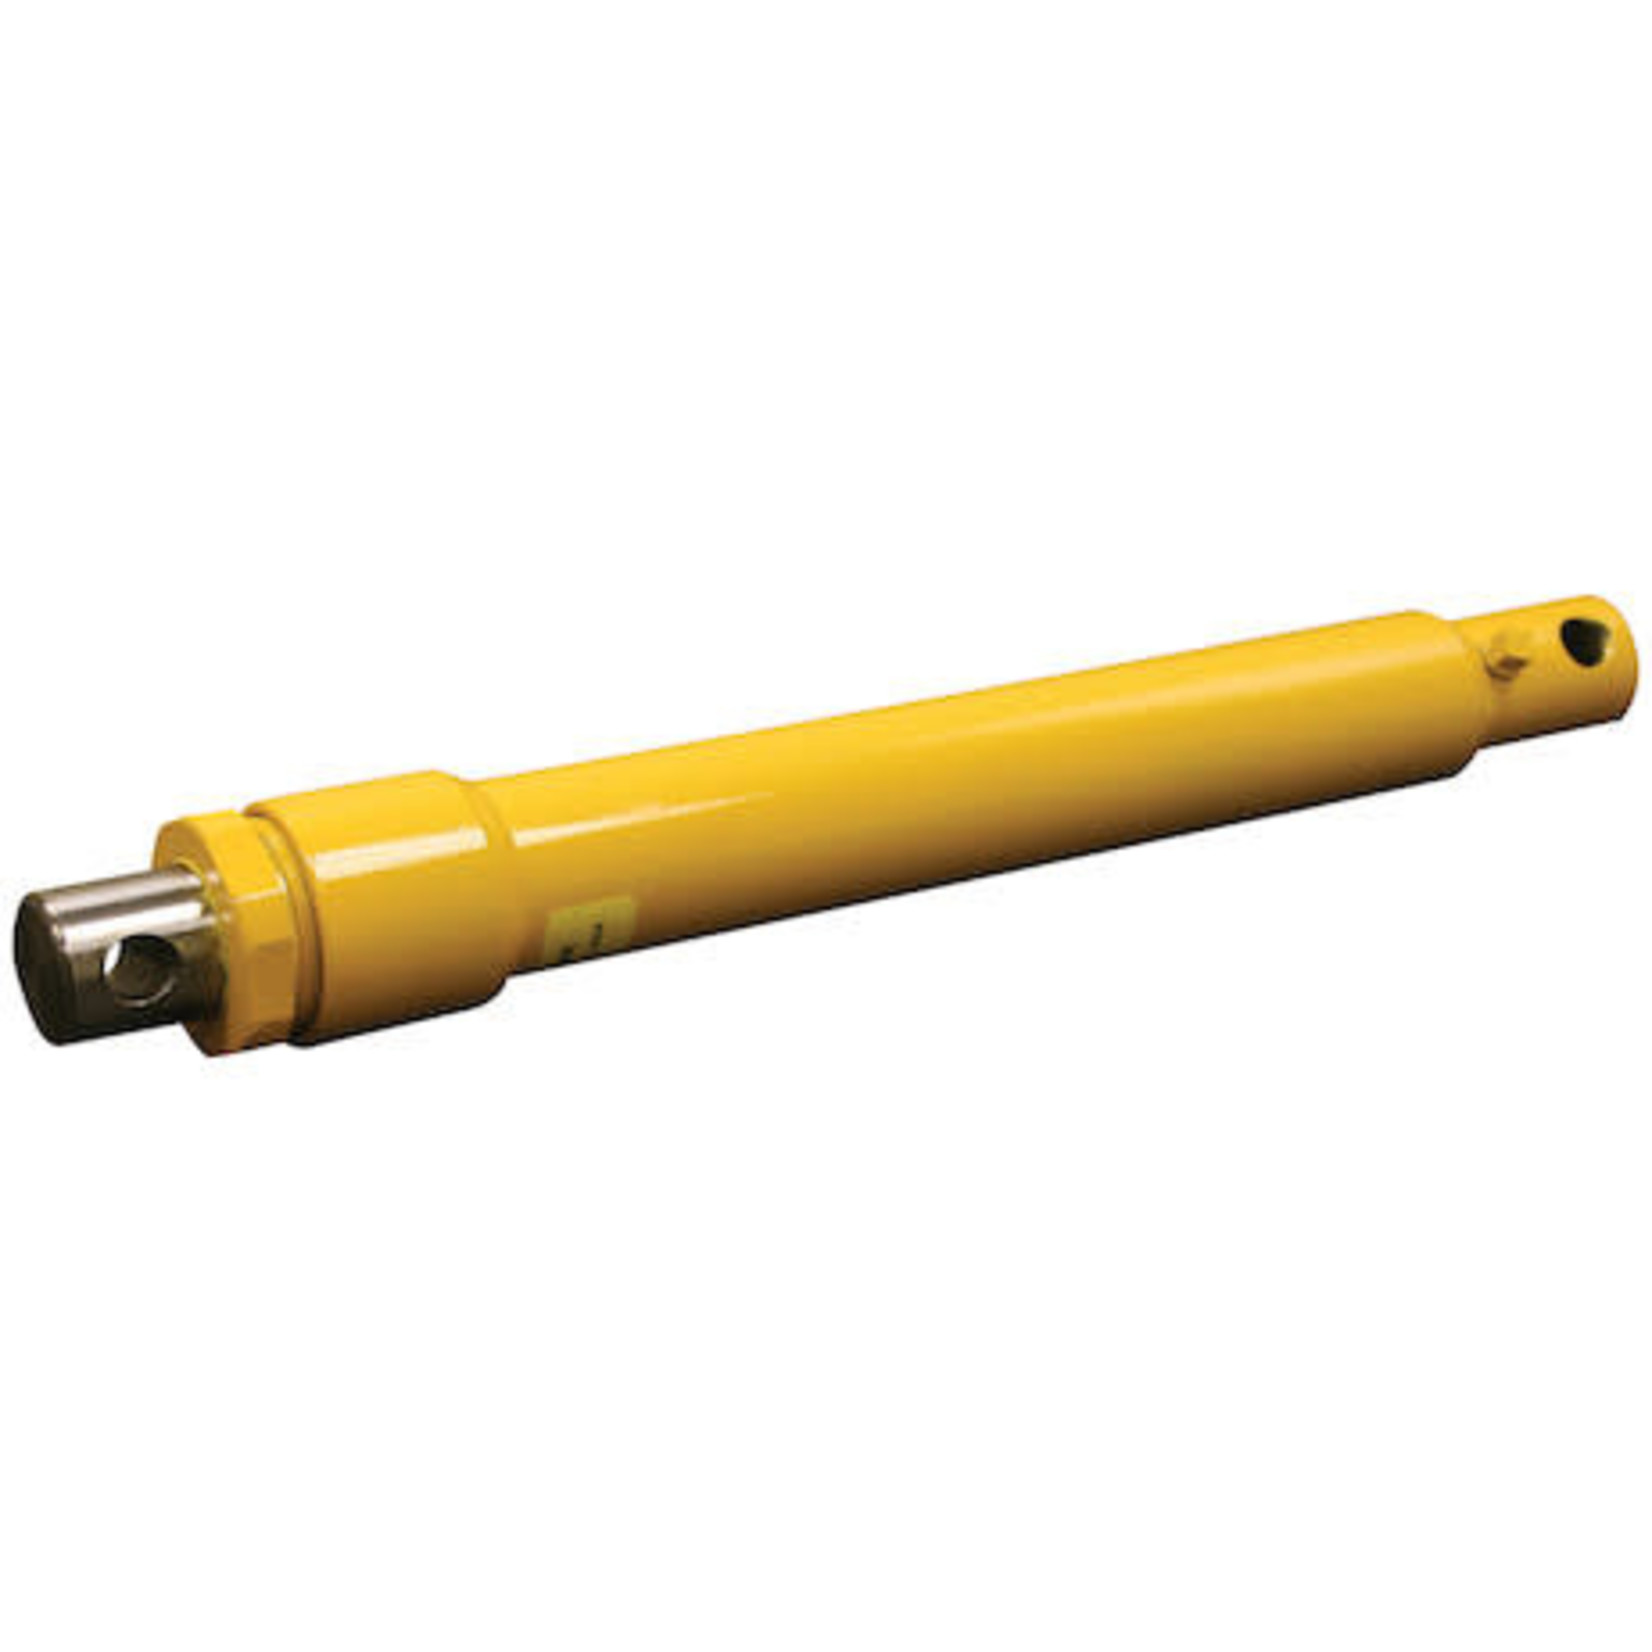 SAM SAM 1-1/2 x 12 Inch Power Angling Cylinder-Replaces Meyer #05437